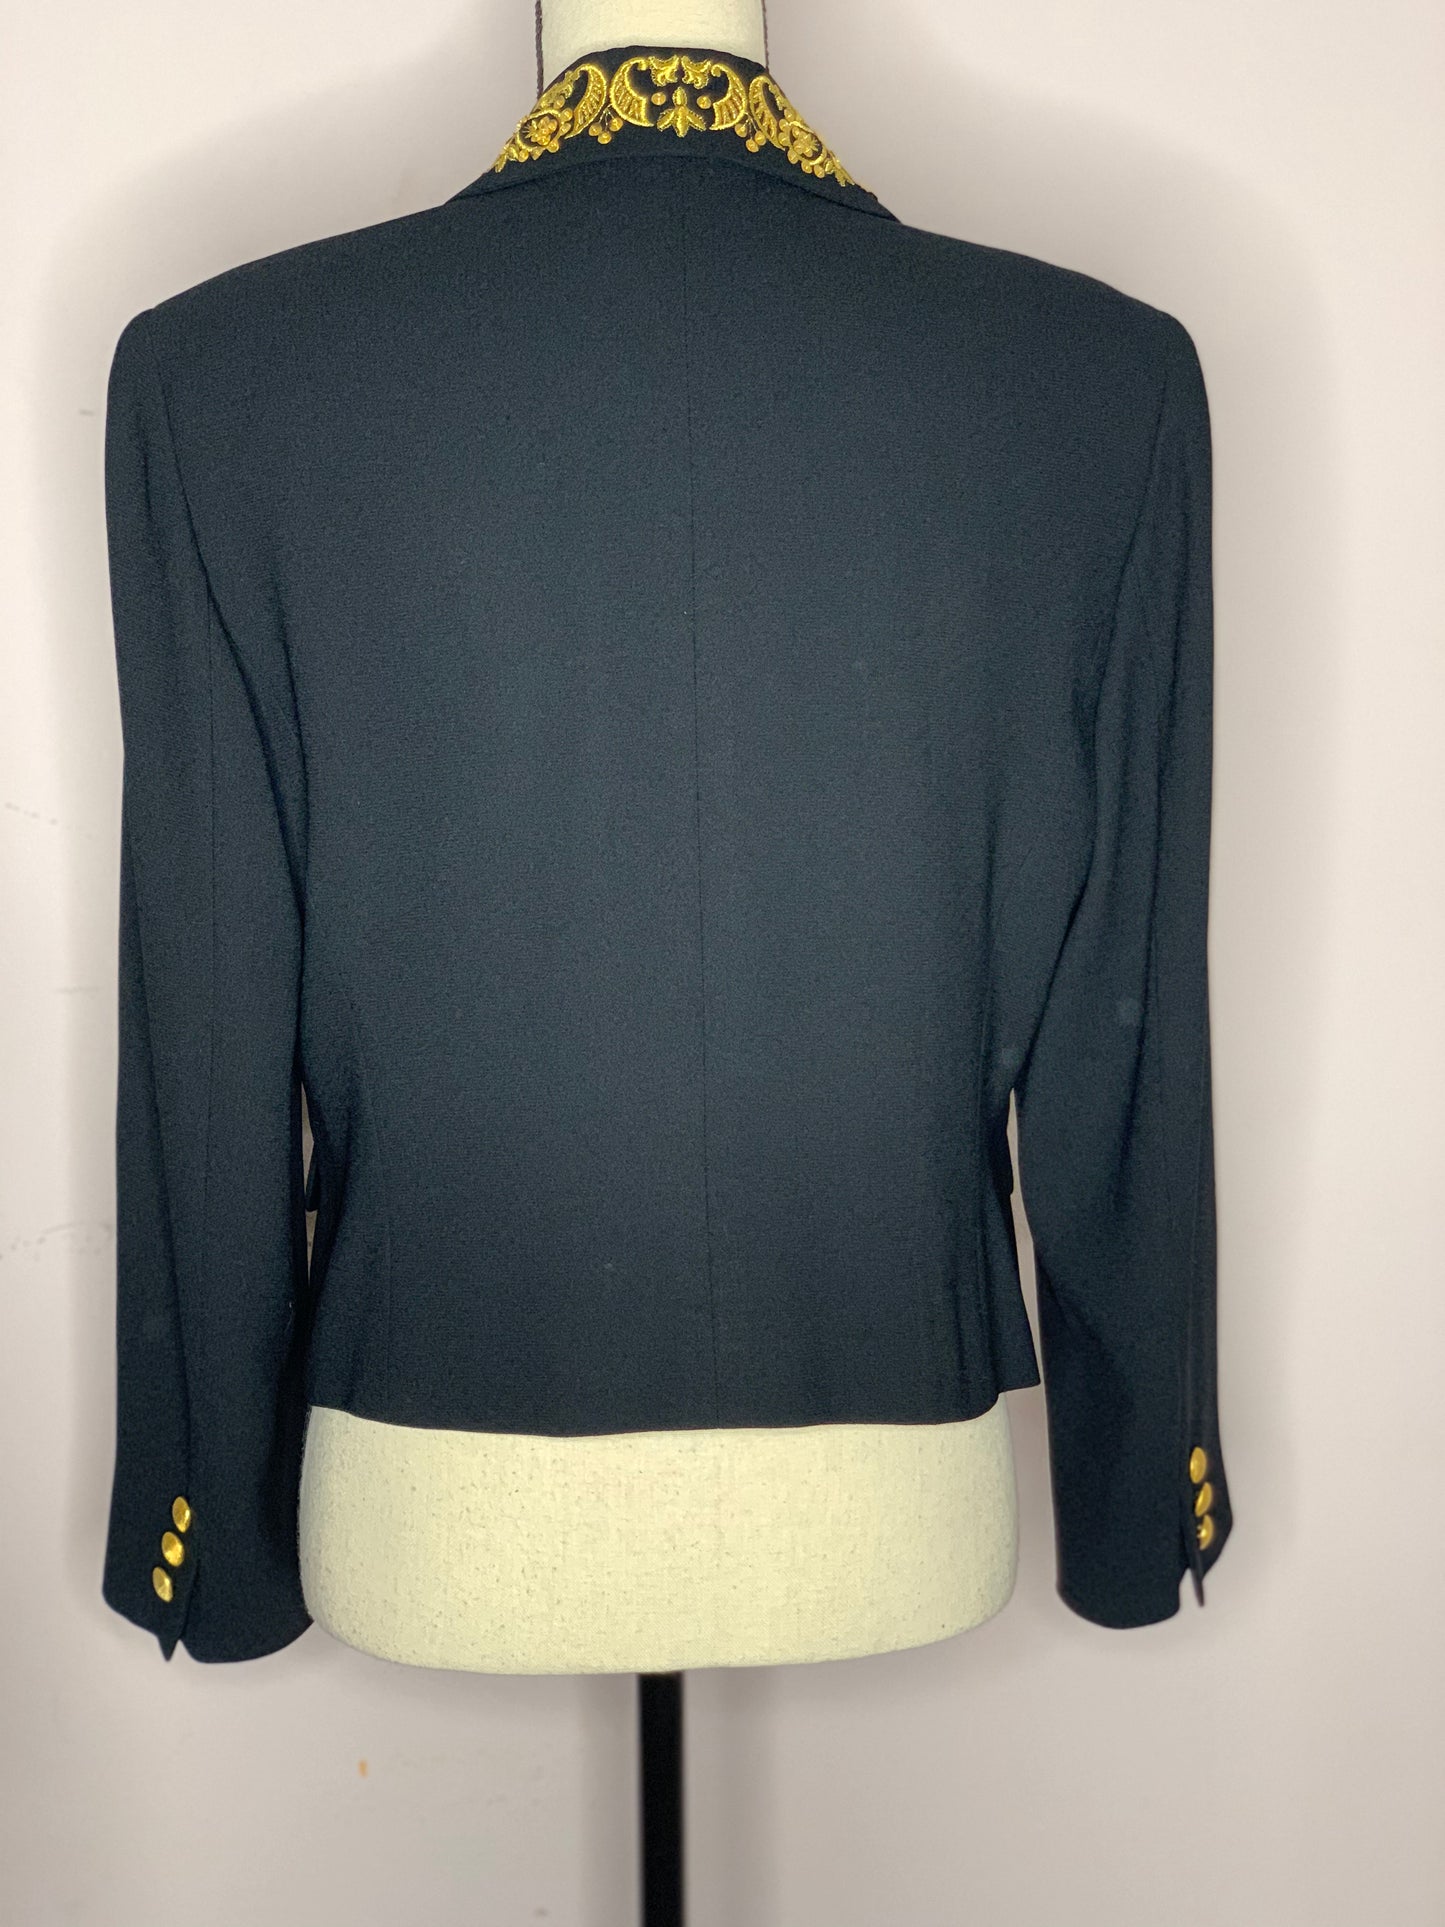 Black Long Sleeve Blazer with Gold Accent Collar and Buttons